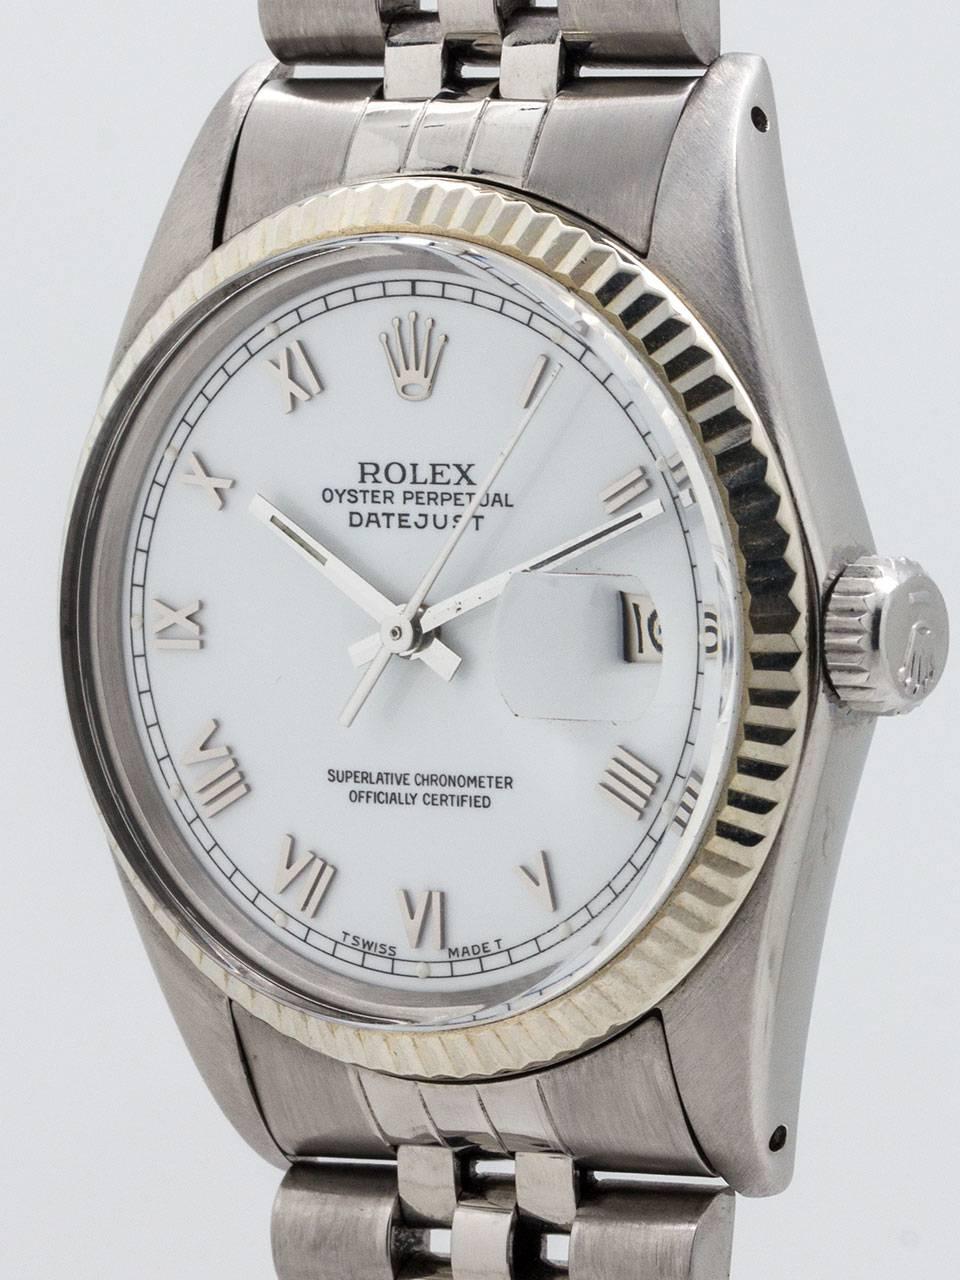 Rolex Stainless Steel Datejust Wristwatch Ref 16014 1980 In Excellent Condition For Sale In West Hollywood, CA